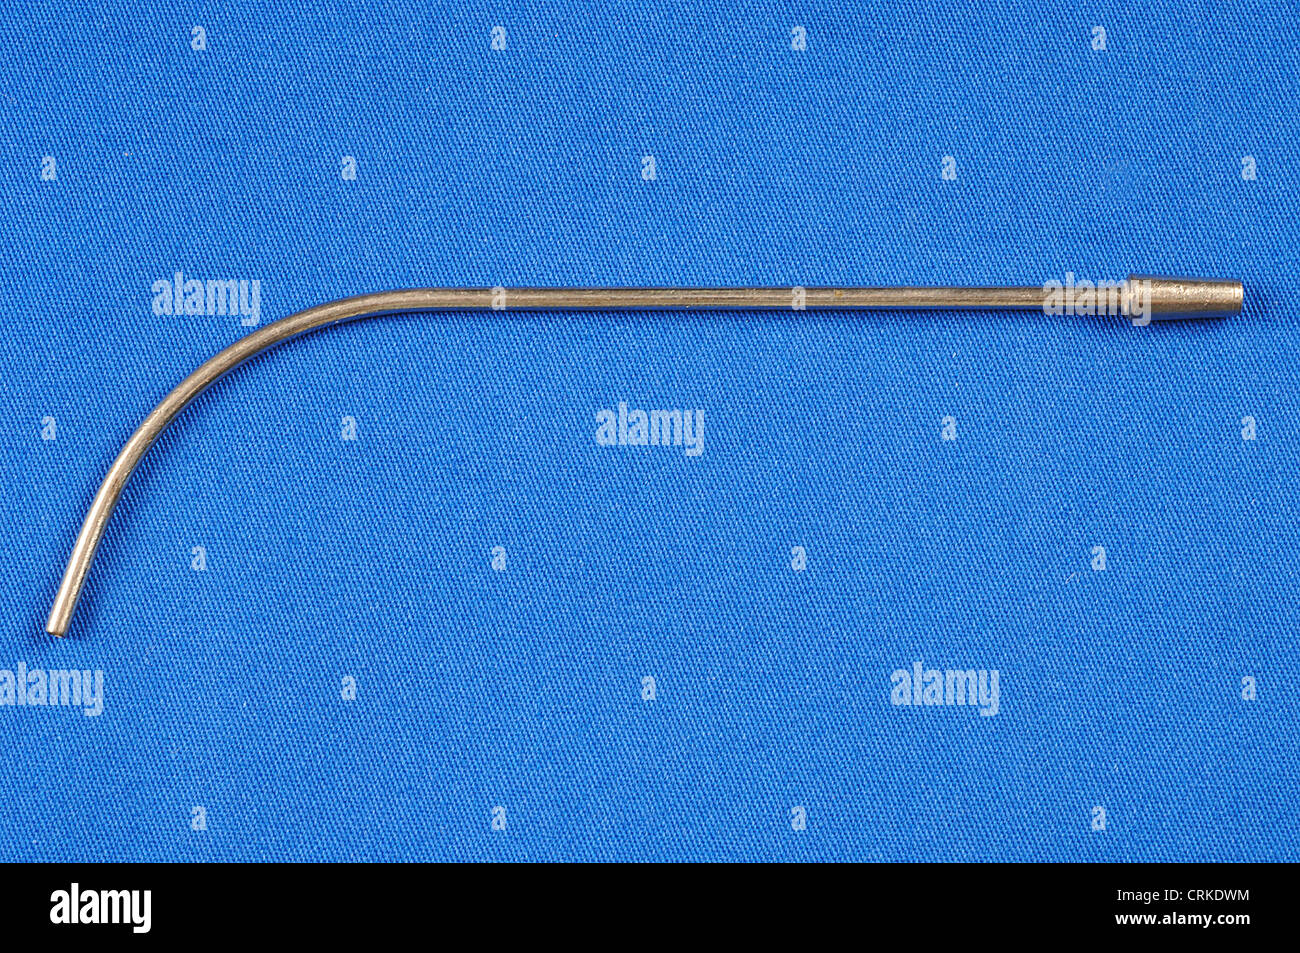 A standard suction tip. This is used to remove fluid from small cavities during surgery. Stock Photo